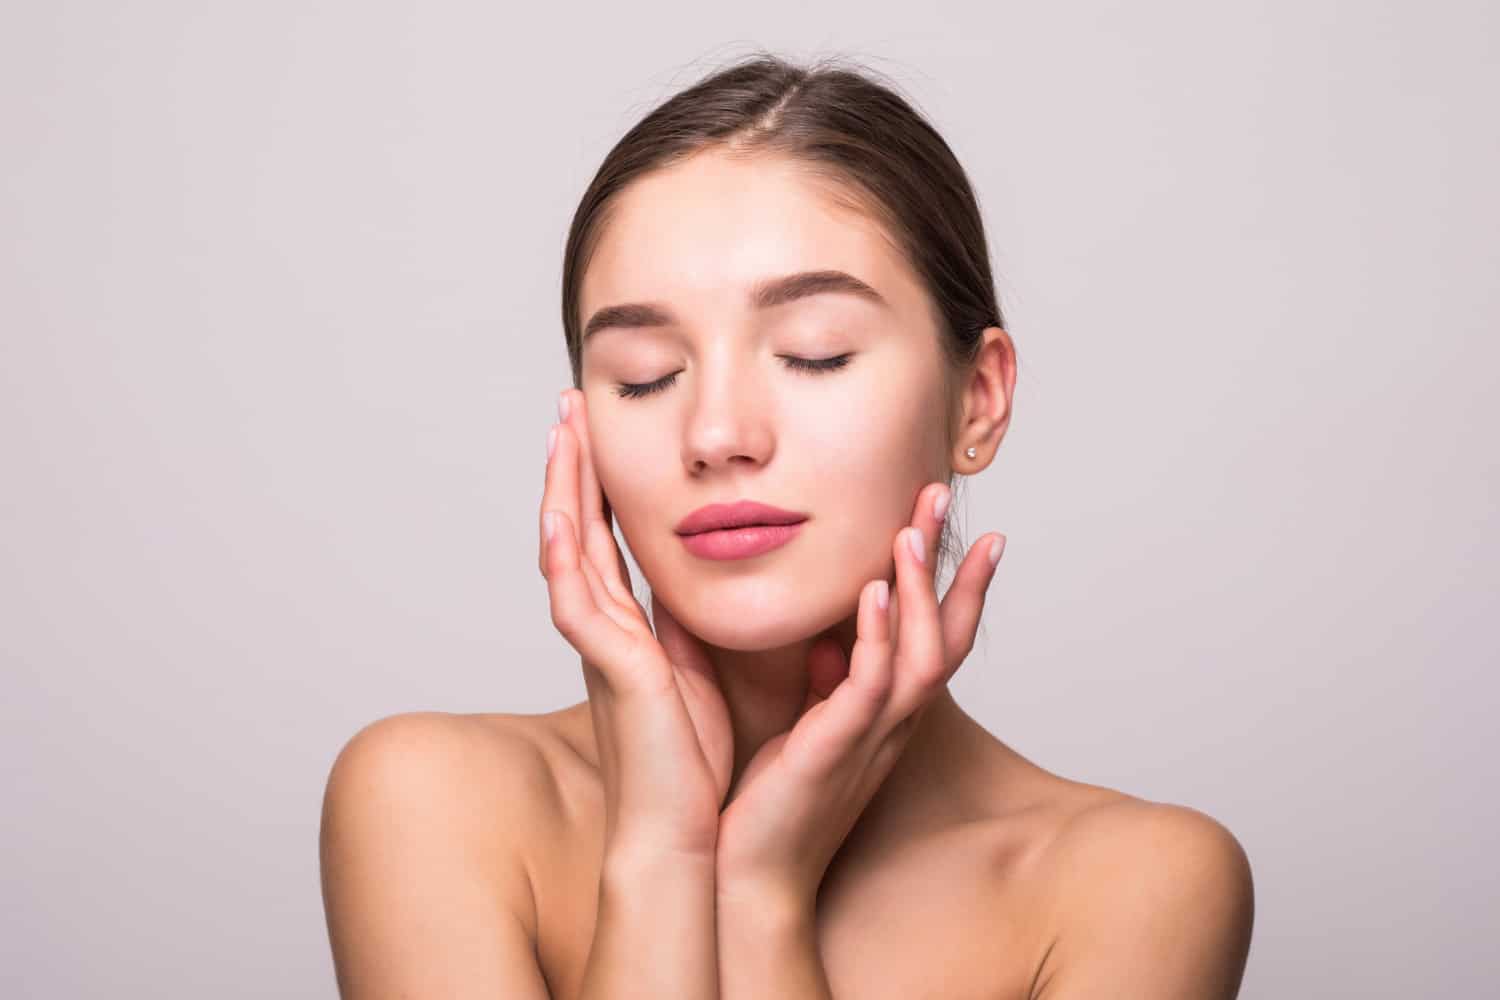 What Are the Benefits of Hyaluronic Acid in Skin Booster Treatments?